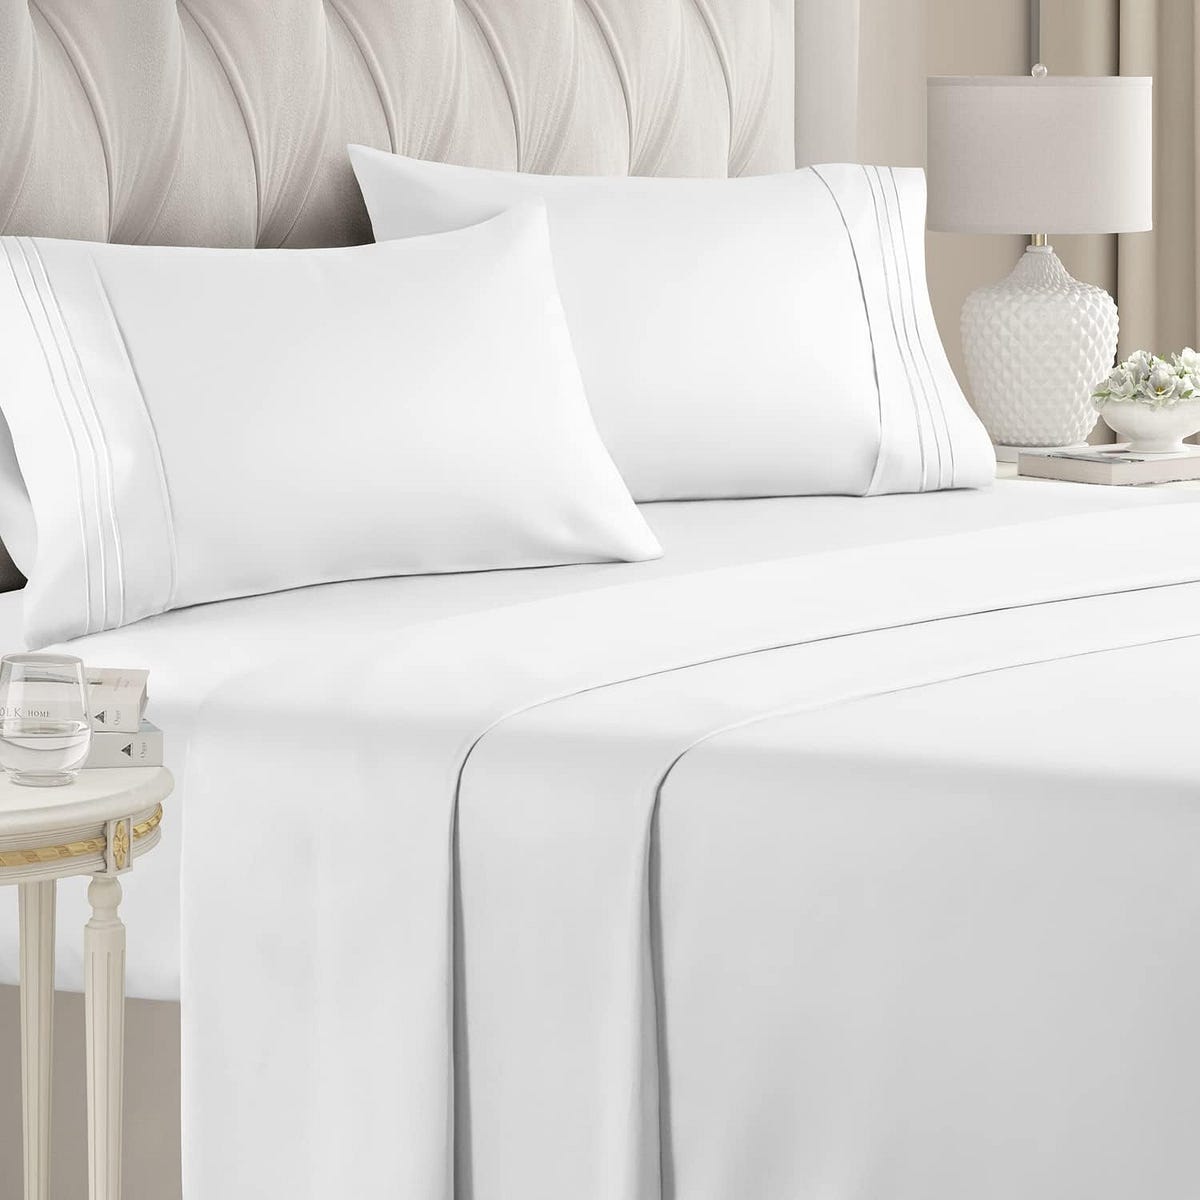 Simple&Opulence: Pure Linen Beddings, Duvet Cover Sets and Sheet Sets